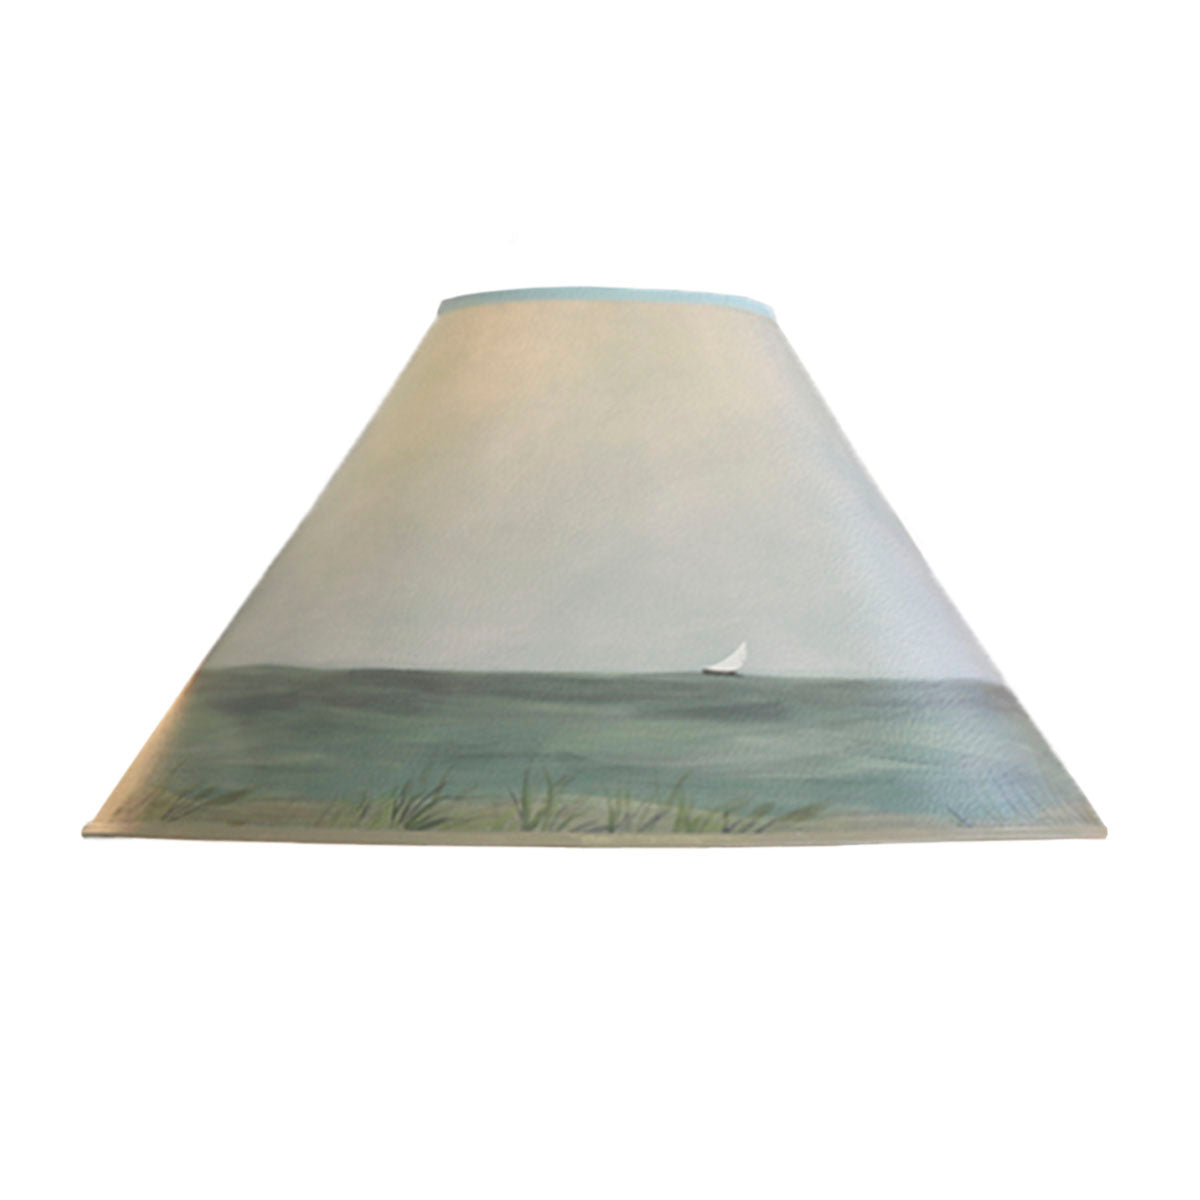 Janna Ugone & Co Lamp Shades Large Conical Lamp Shade in Shore